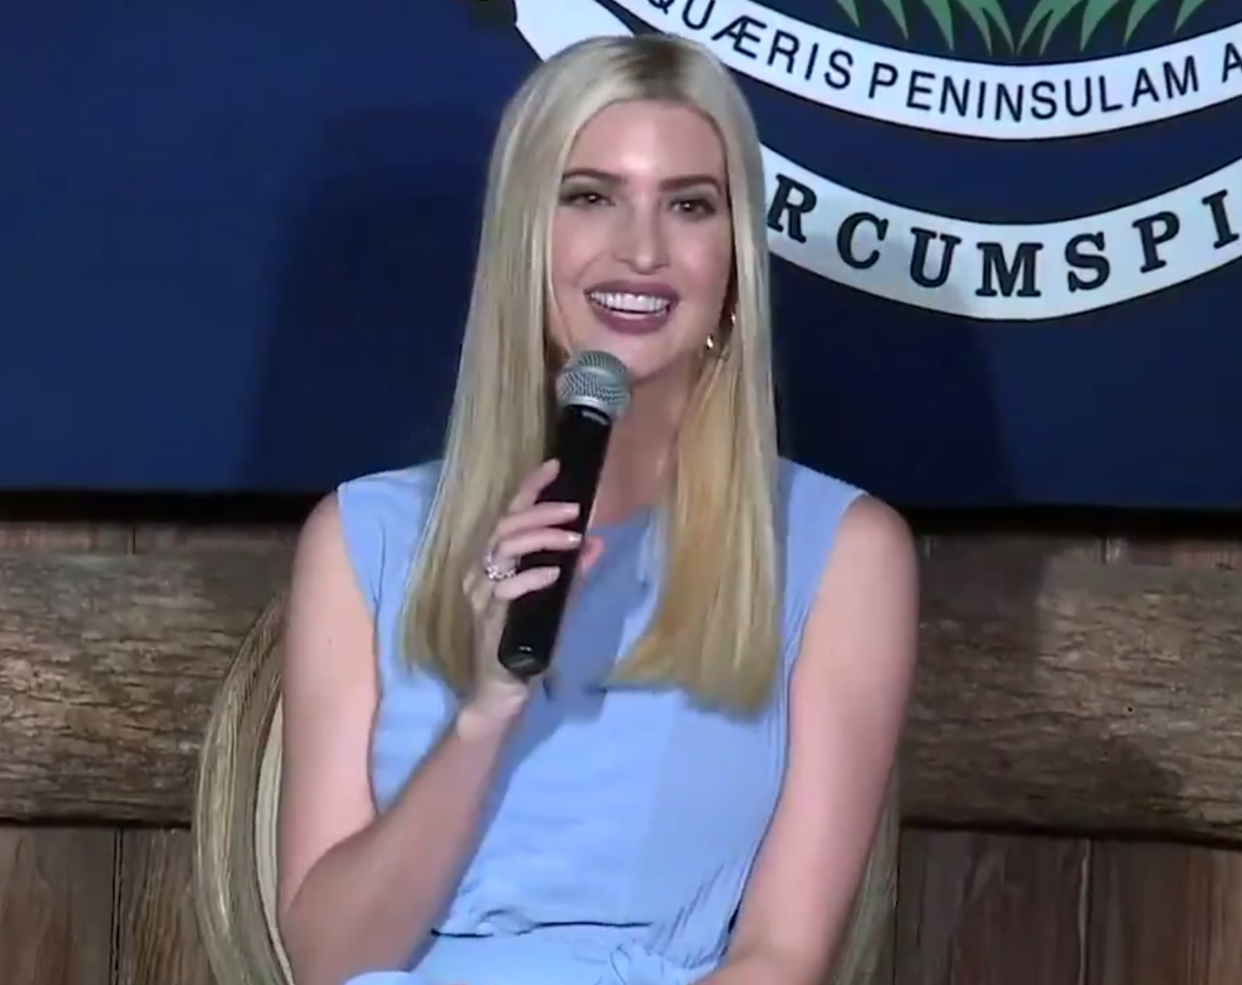 Ivanka Trump speaks about learning guitar during the coronavirus pandemic ((The Recount - Twitter))